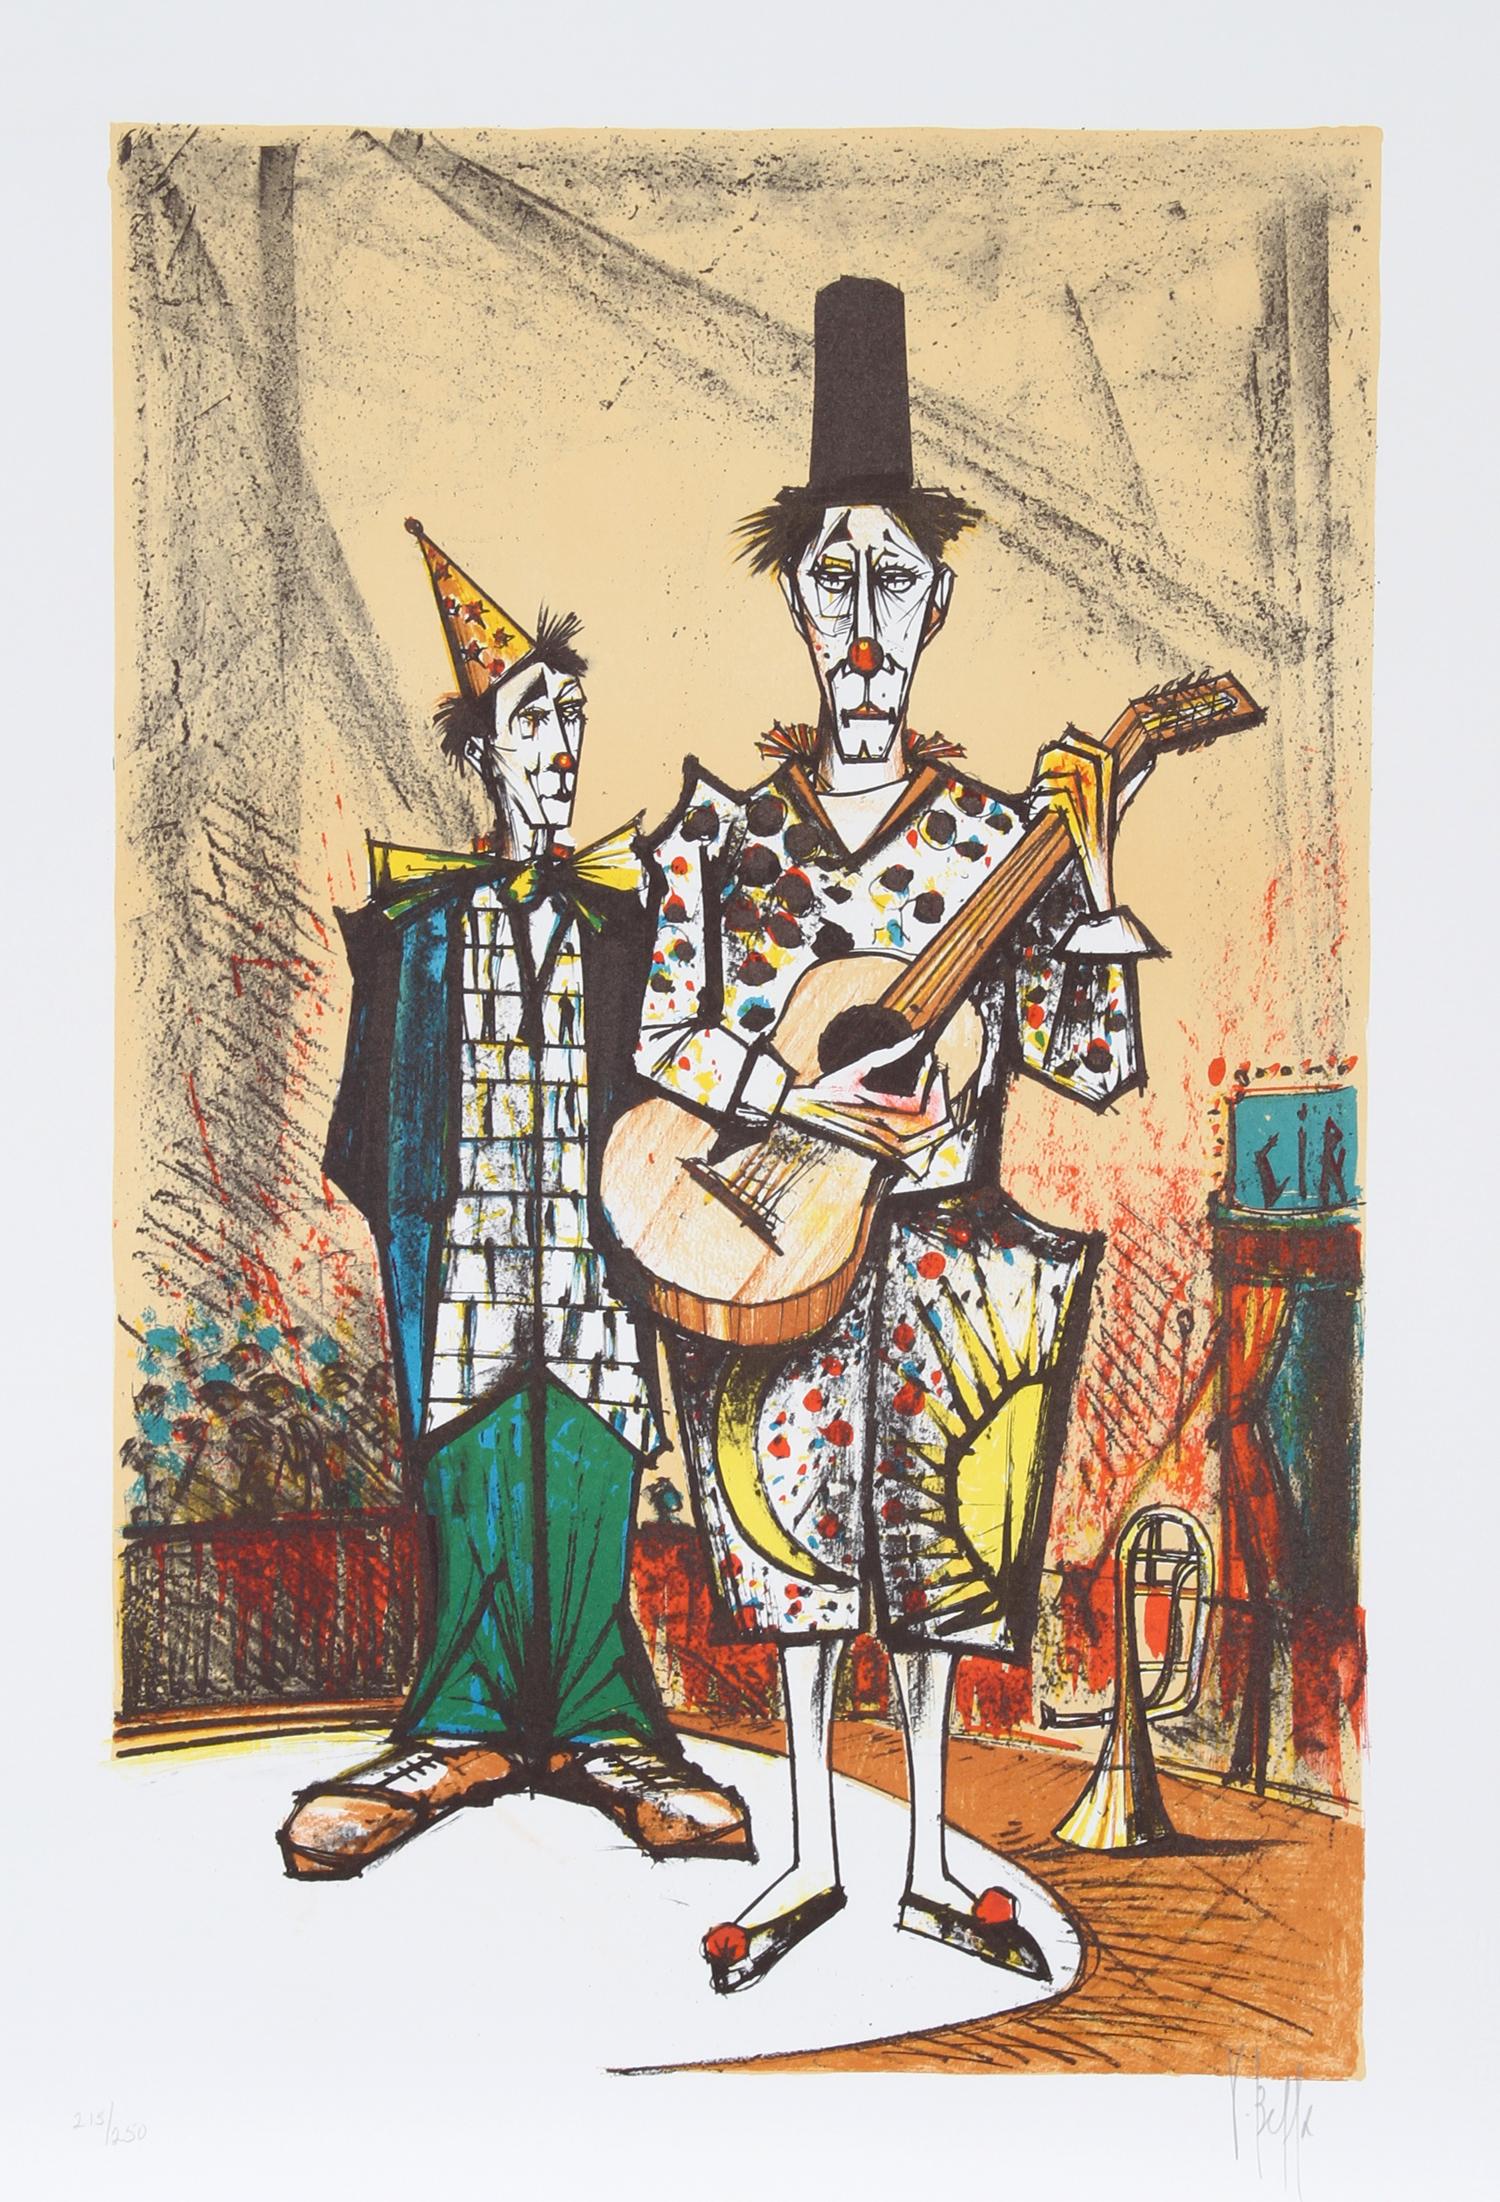 Clowns
V. Beffa
Date: circa 1980
Lithograph, signed and numbered in pencil
Edition of 250
Image Size: 24.5 x 16 inches
Size: 29.5 in. x 22 in. (74.93 cm x 55.88 cm)